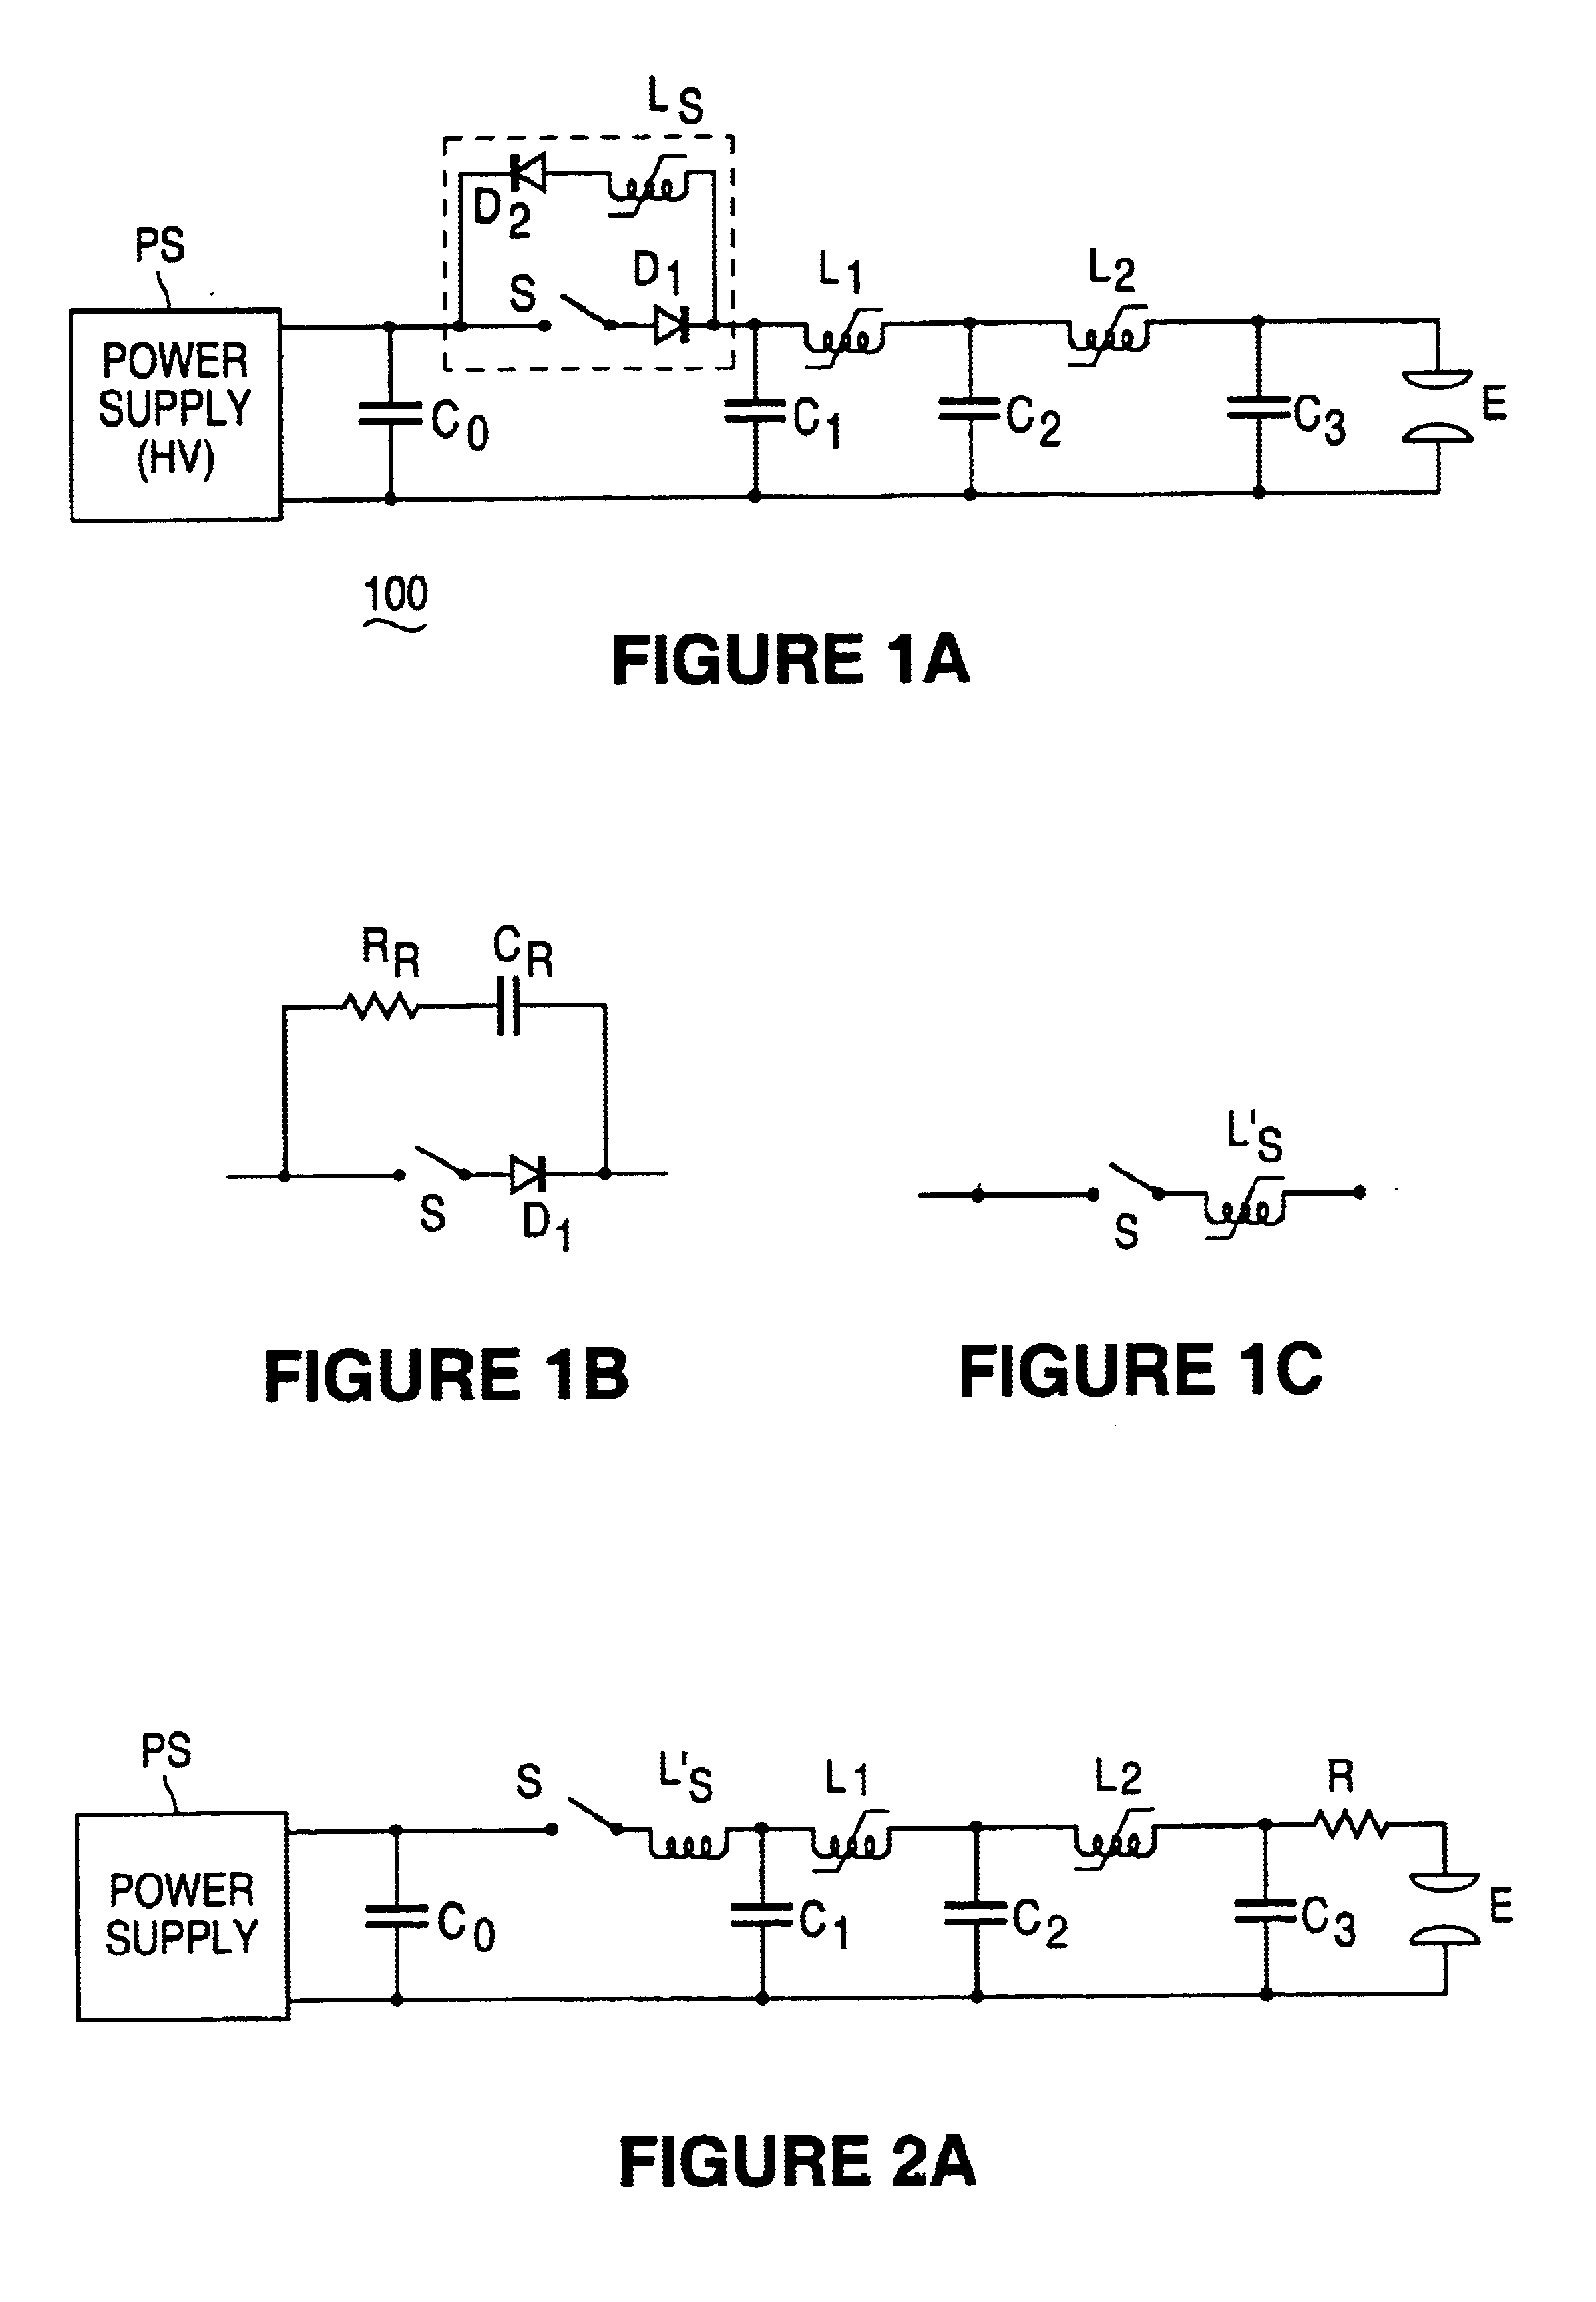 Electrical excitation circuit for a pulsed gas laser